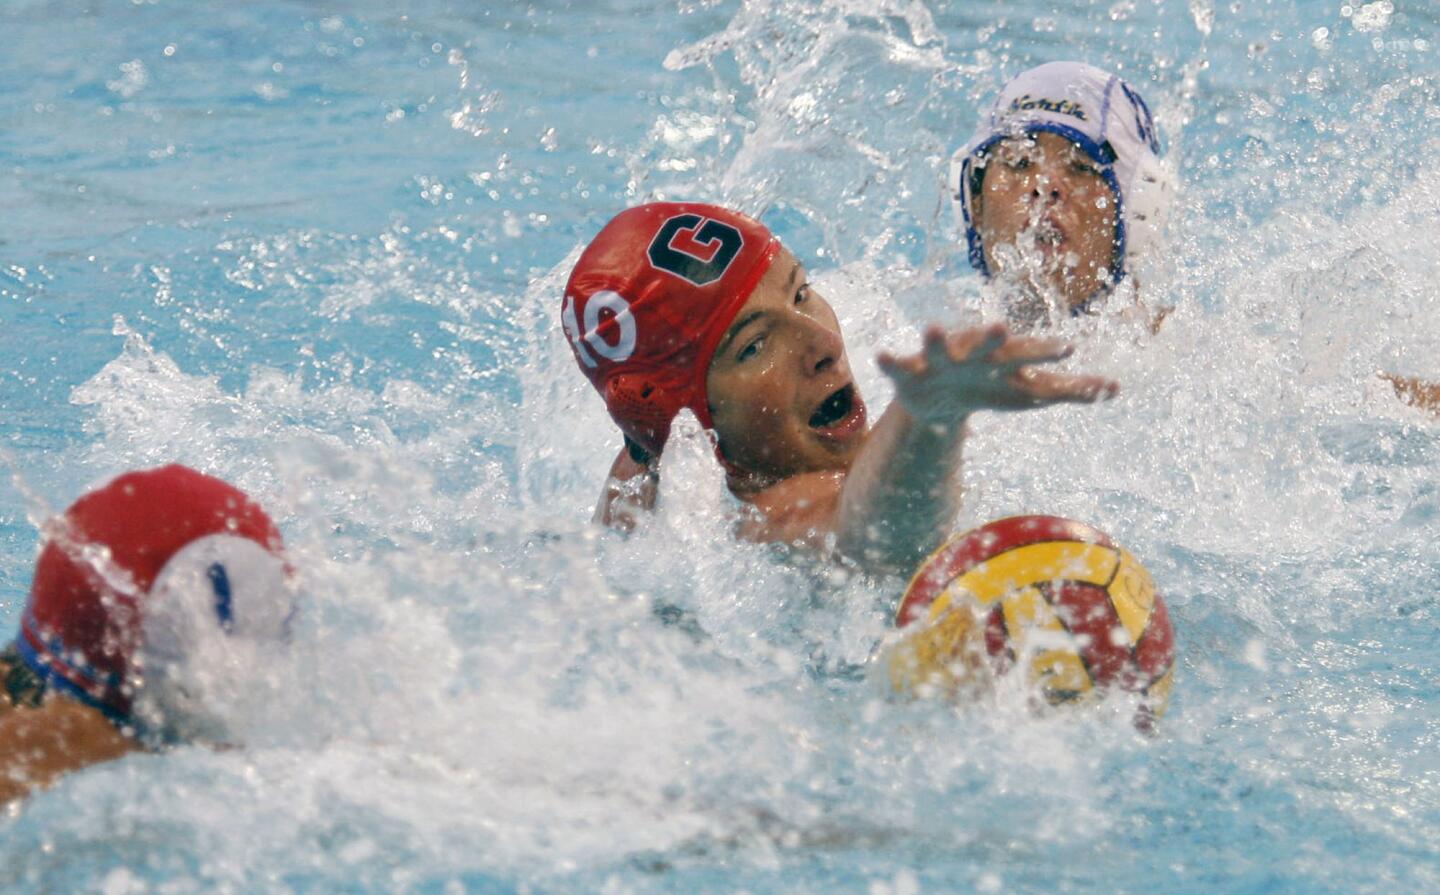 Glendale's Arman Momdzhyan, center, fights for the ball during the CIF Southern Southern Section Division V playoffs against JW North, which took place at Burbank High School on Wednesday, November 7, 2012.